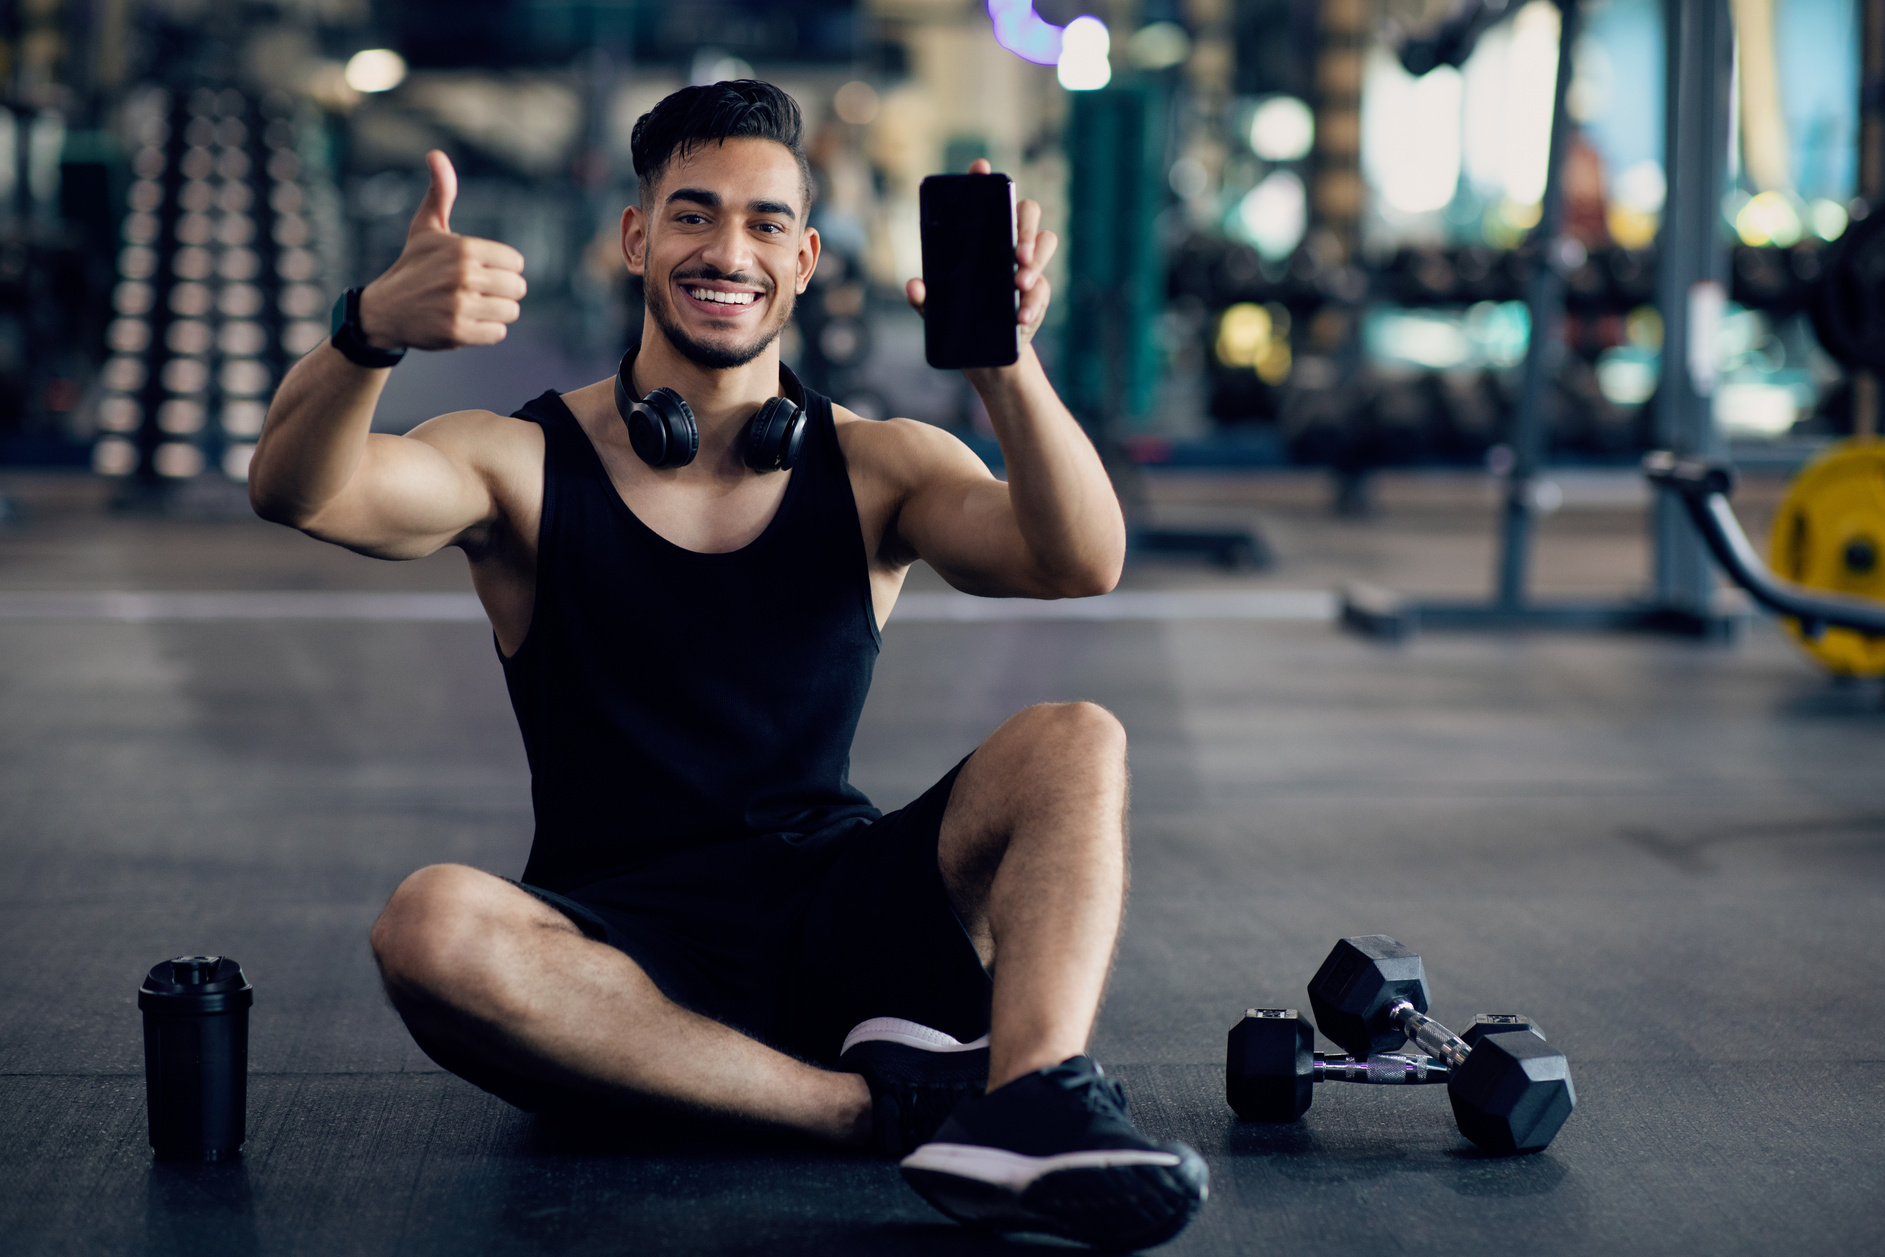 Cool Fitness App. Young Arab Man Posing in Gym with Blank Smartphone